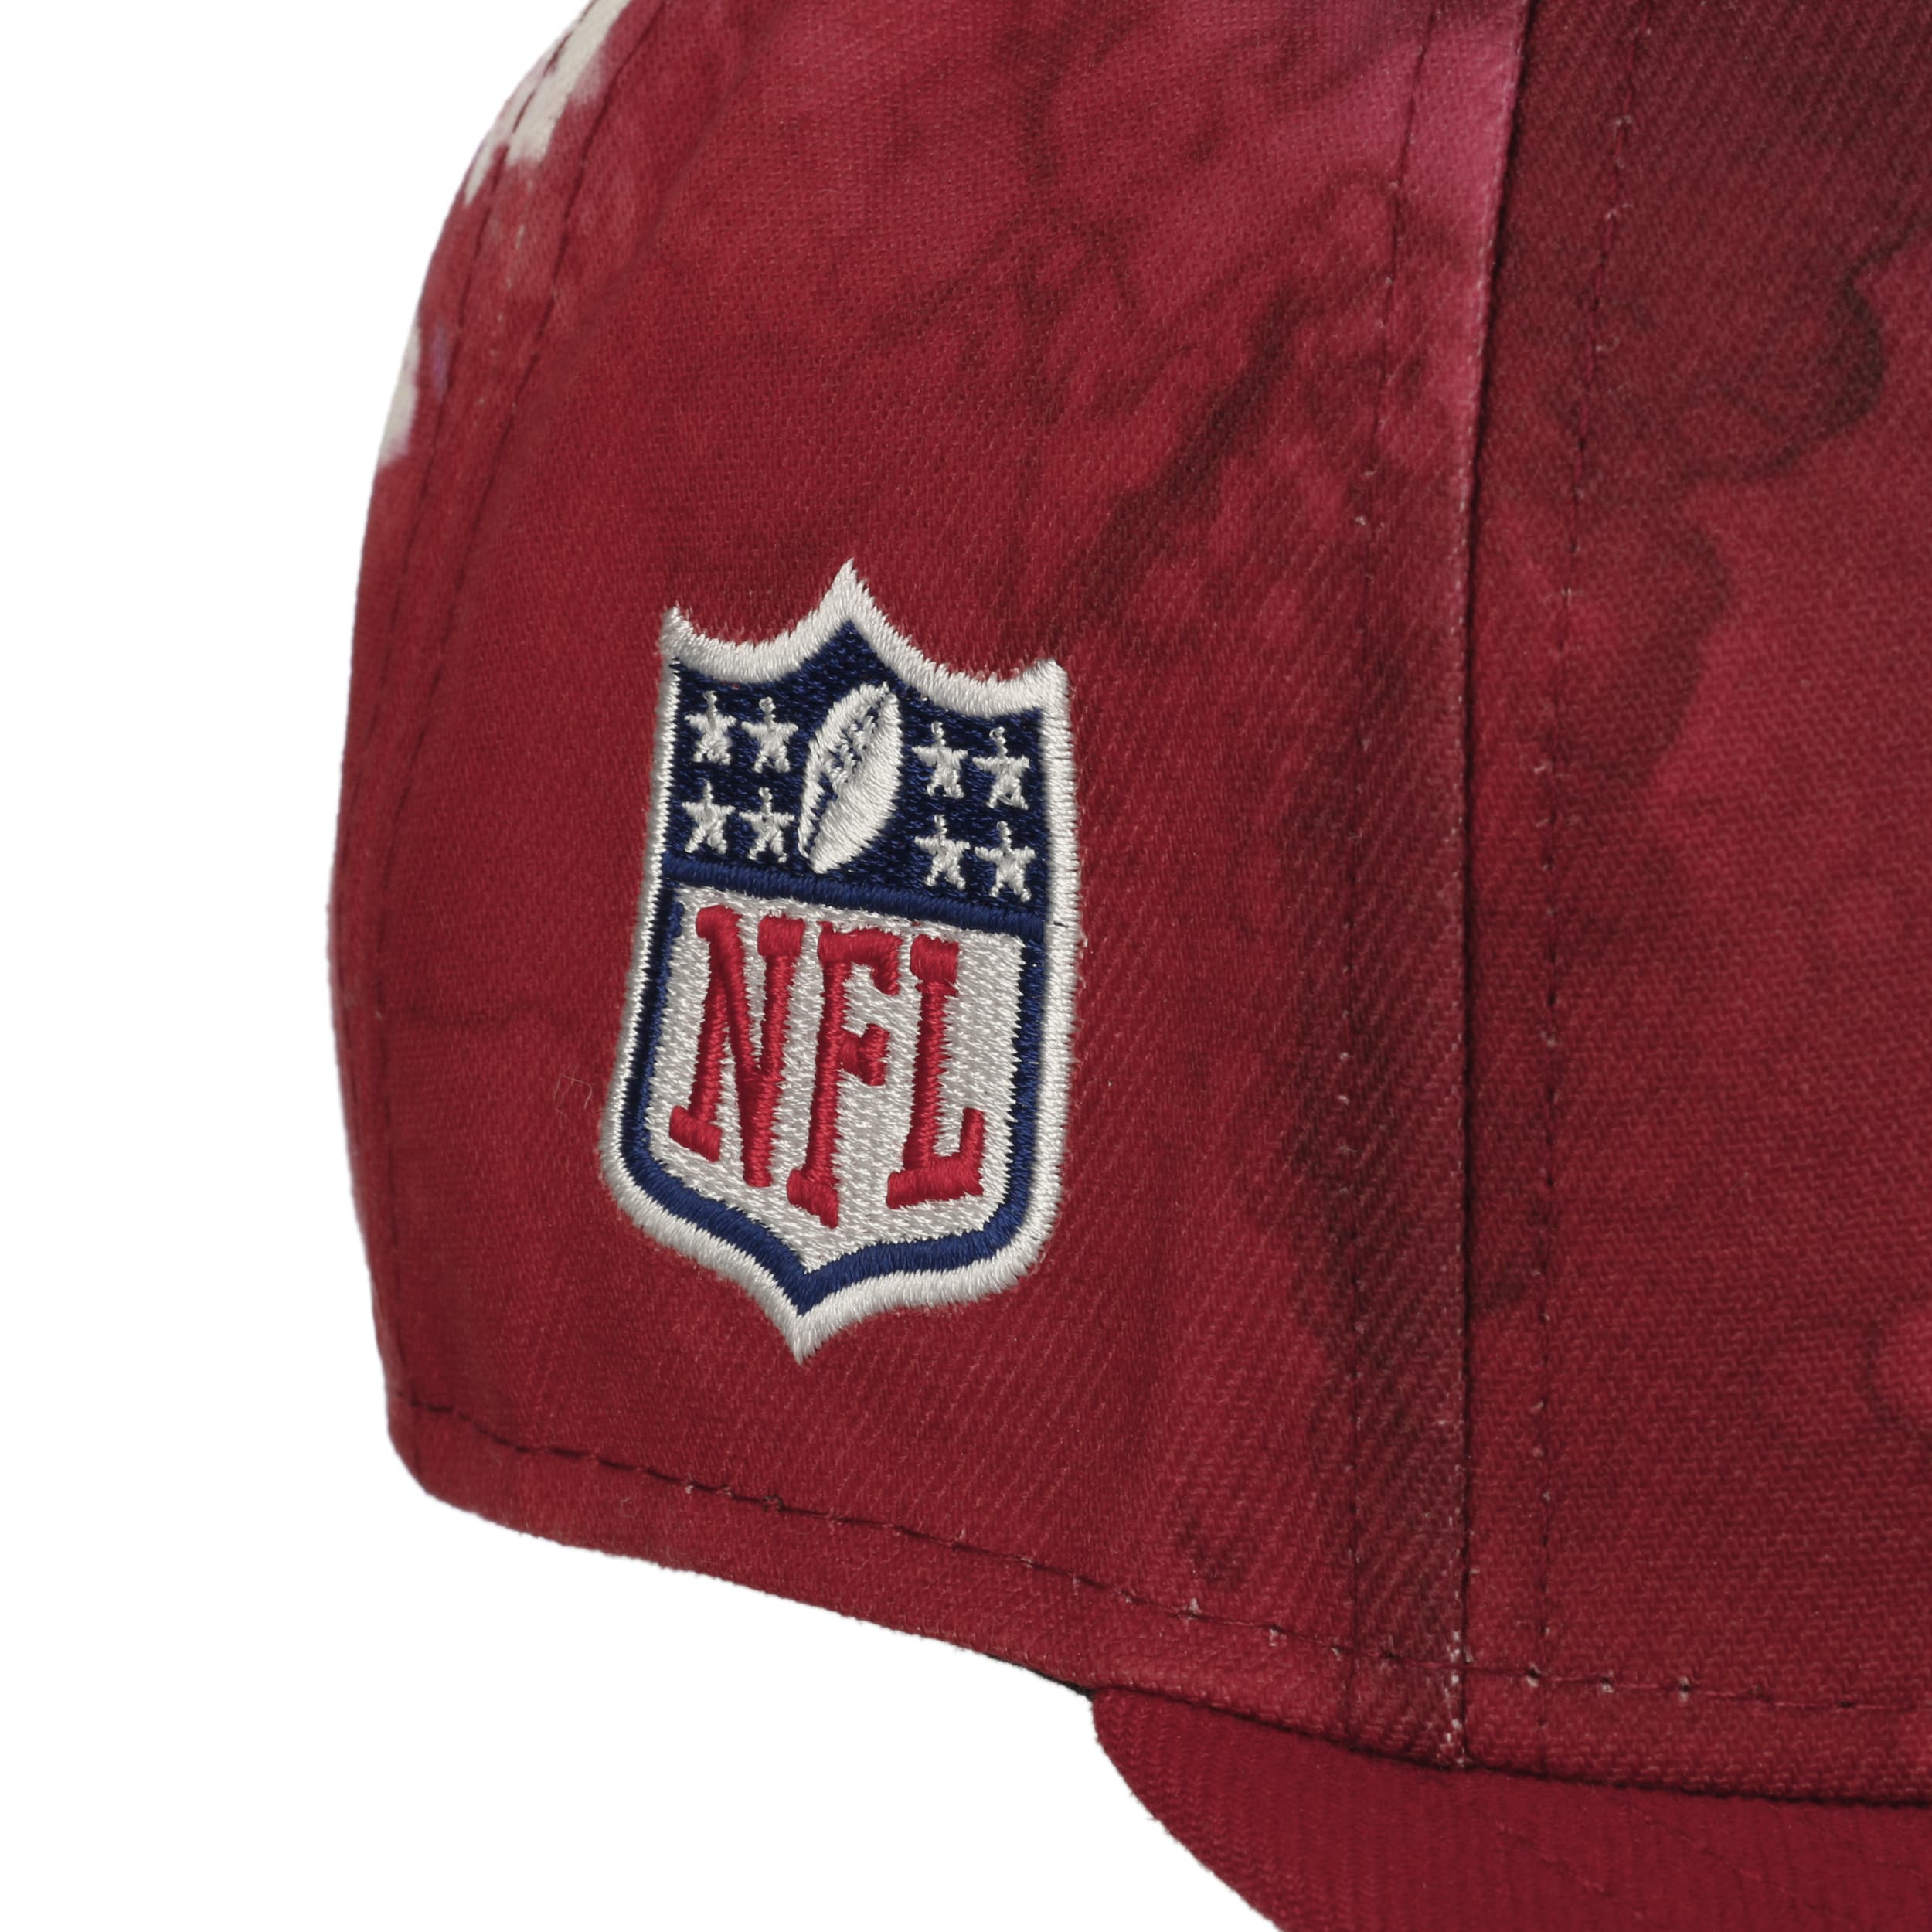 arizona cardinals fitted hat